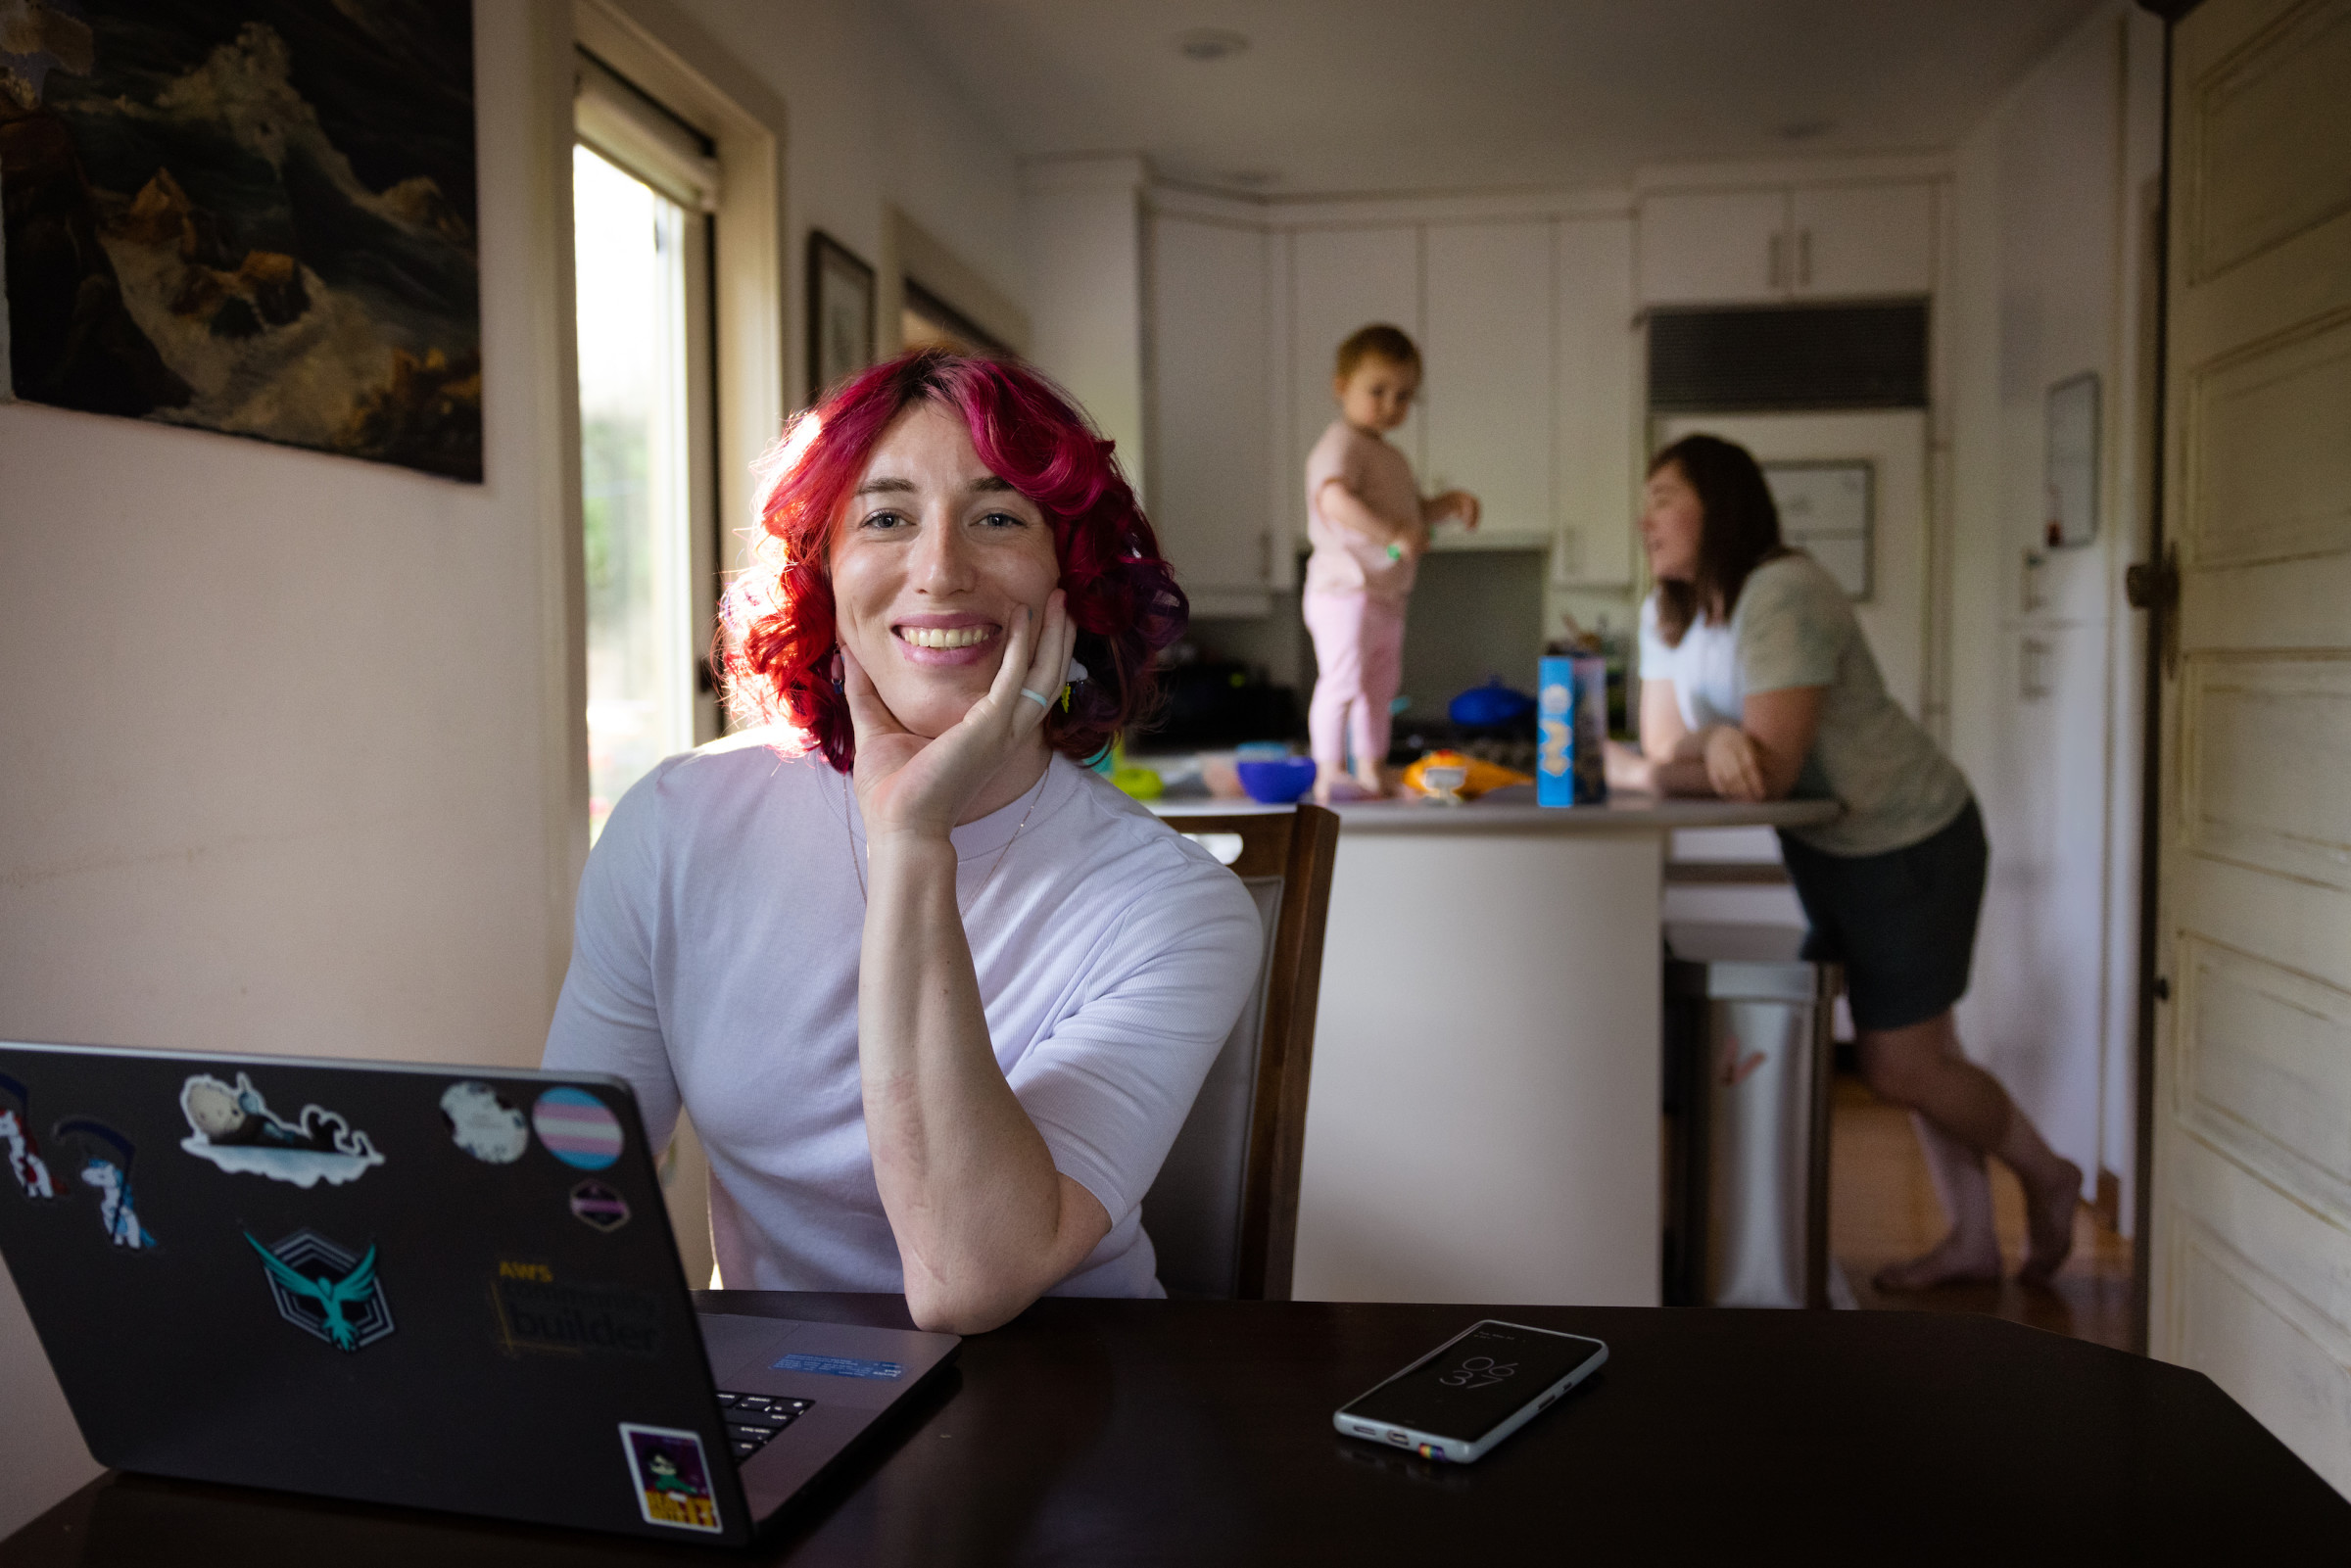  Kyler smiles as she sits at her desk in the kitchen, with her daughter and partner in the background.